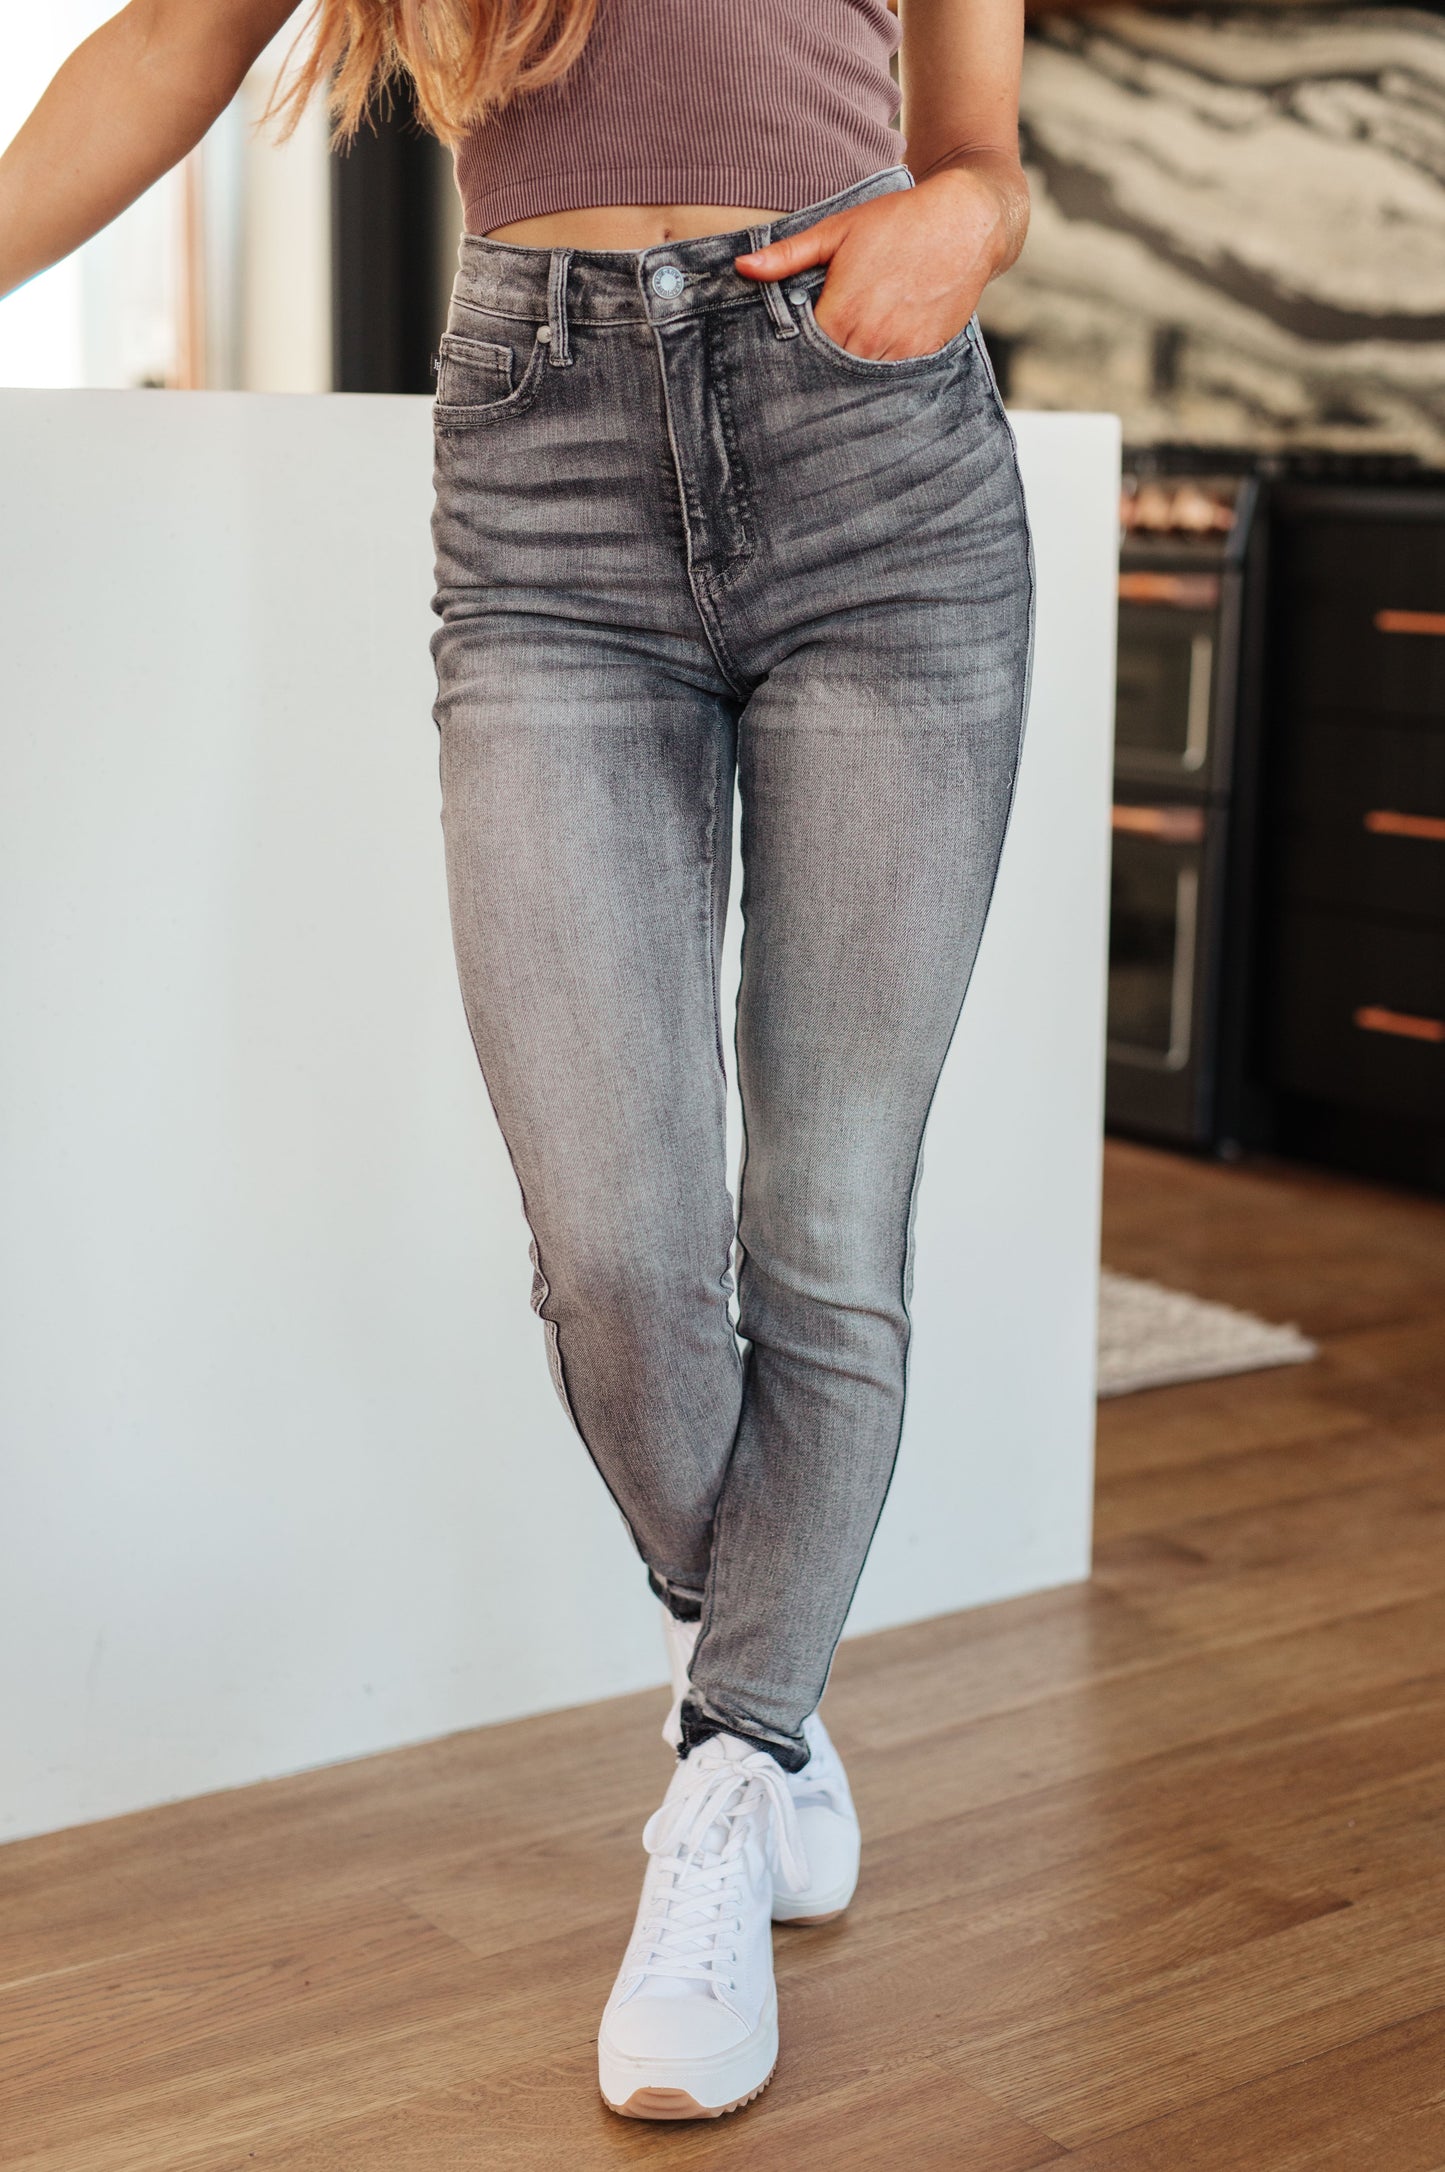 ﻿Get ready for a stylish and comfortable fit with our Hadley High Rise Control Top Release Hem Skinny Jeans from Judy Blue! Our tummy control technology will give you a flattering silhouette, while the released hem adds a trendy touch to the washed out gray color. Elevate your wardrobe today! 0 - 24W